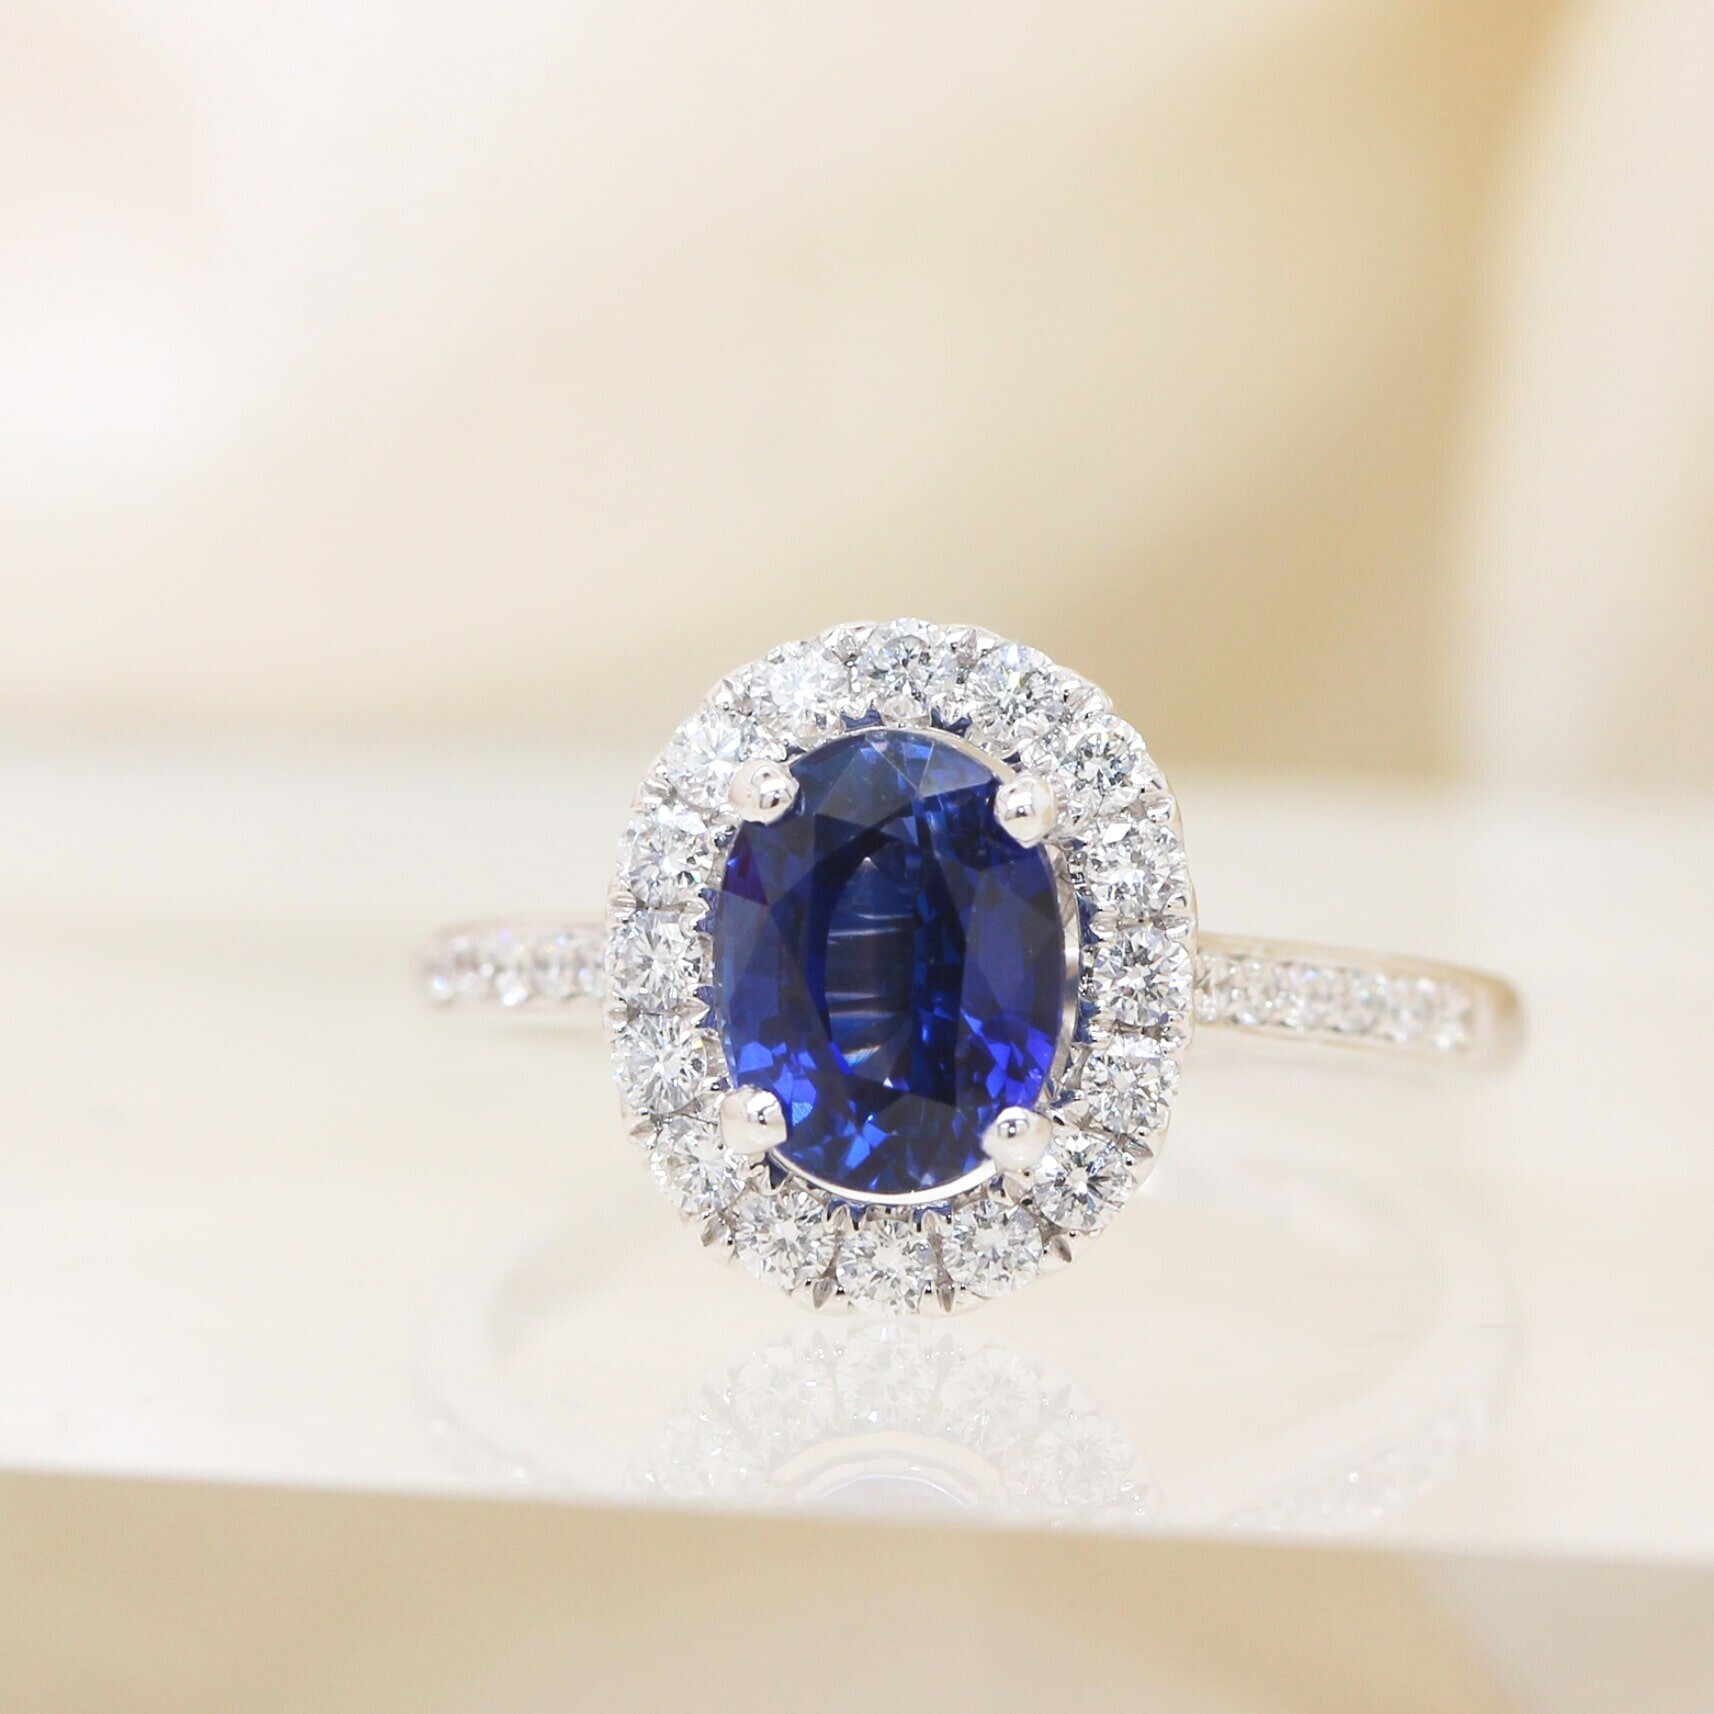 Halo Engagement Rings | Holts Gems